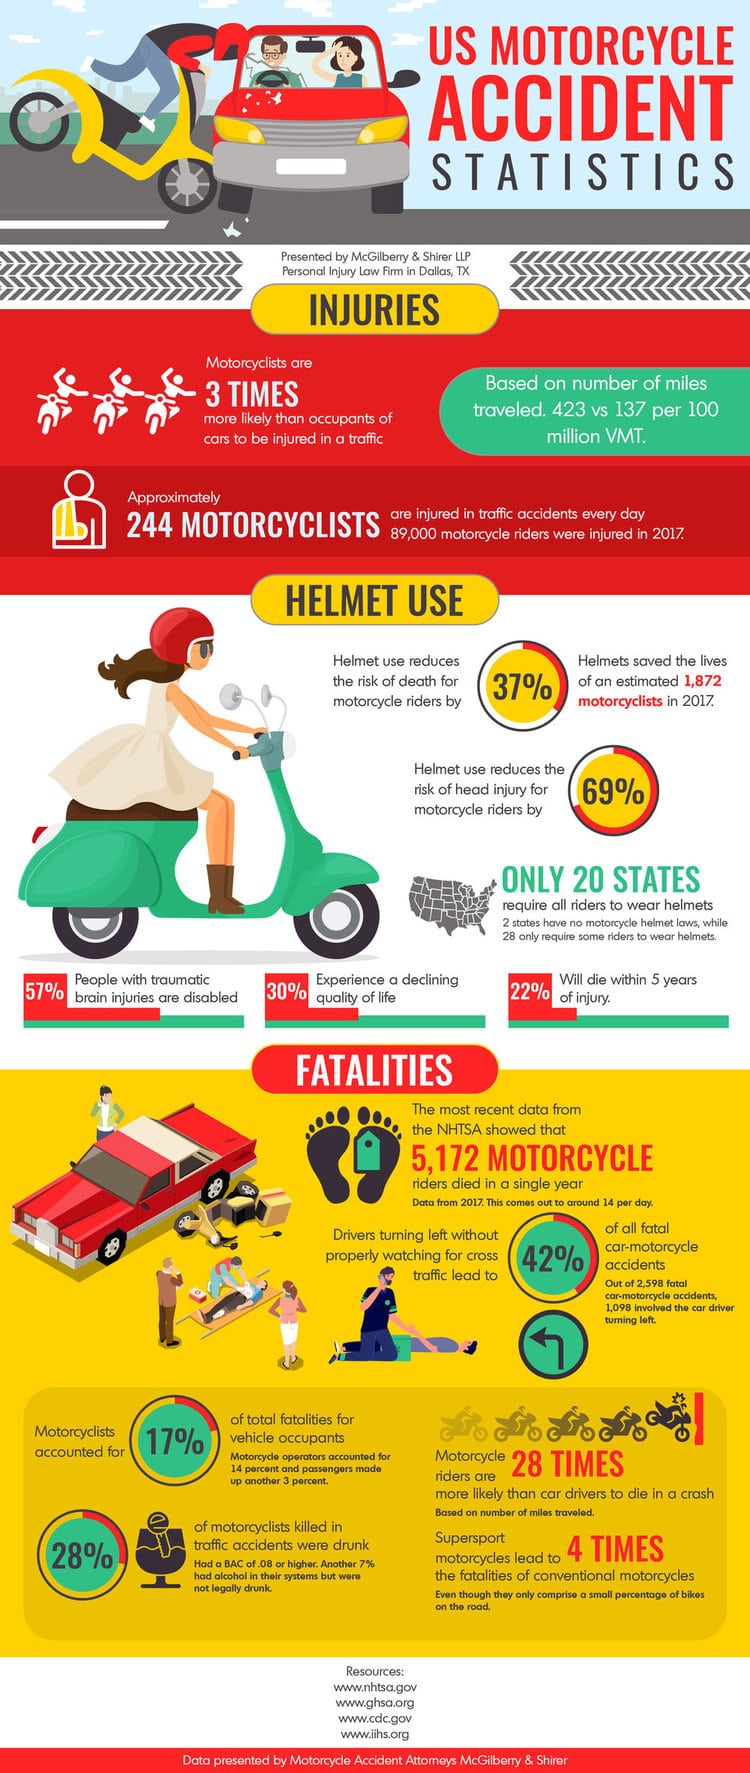 Detailed motorcycle accident statistics for the United States, compiled from the most respected resources, containing facts about motorcycle injuries, helmet use, and fatalities